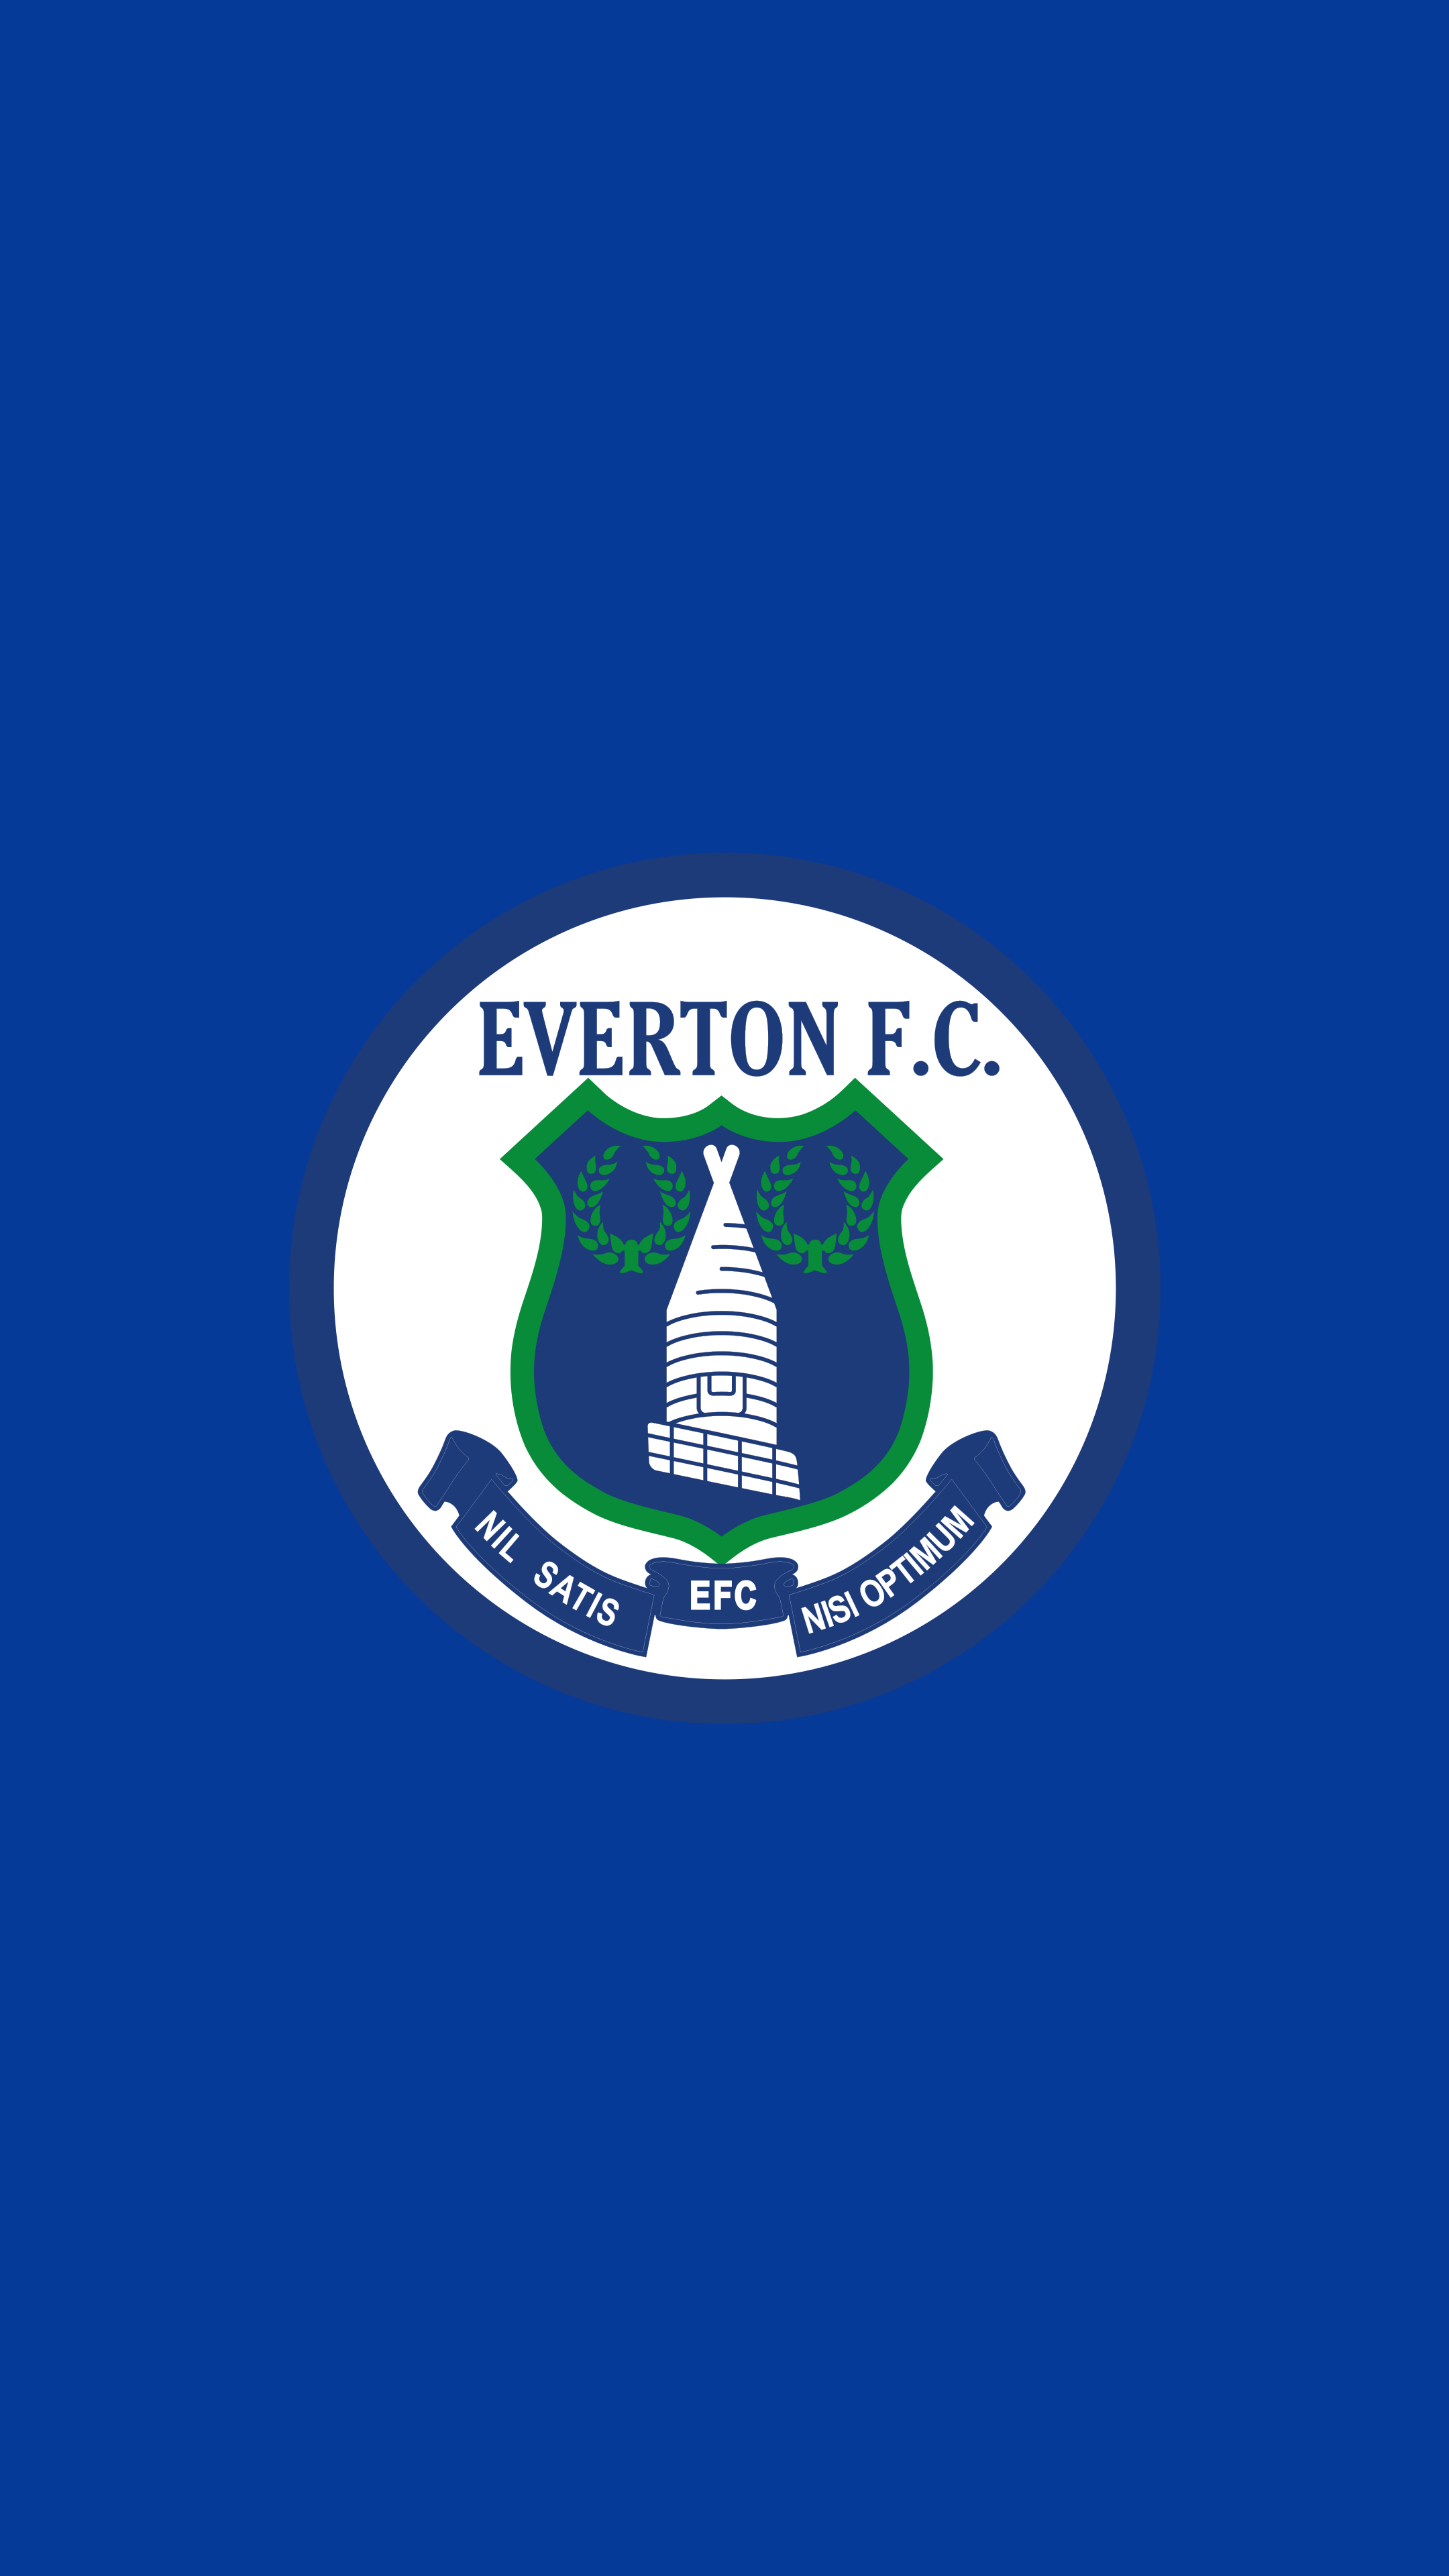 Everton Fc Wallpaper 71 Images In Collection Page - Everton Fc Logo 1978 , HD Wallpaper & Backgrounds